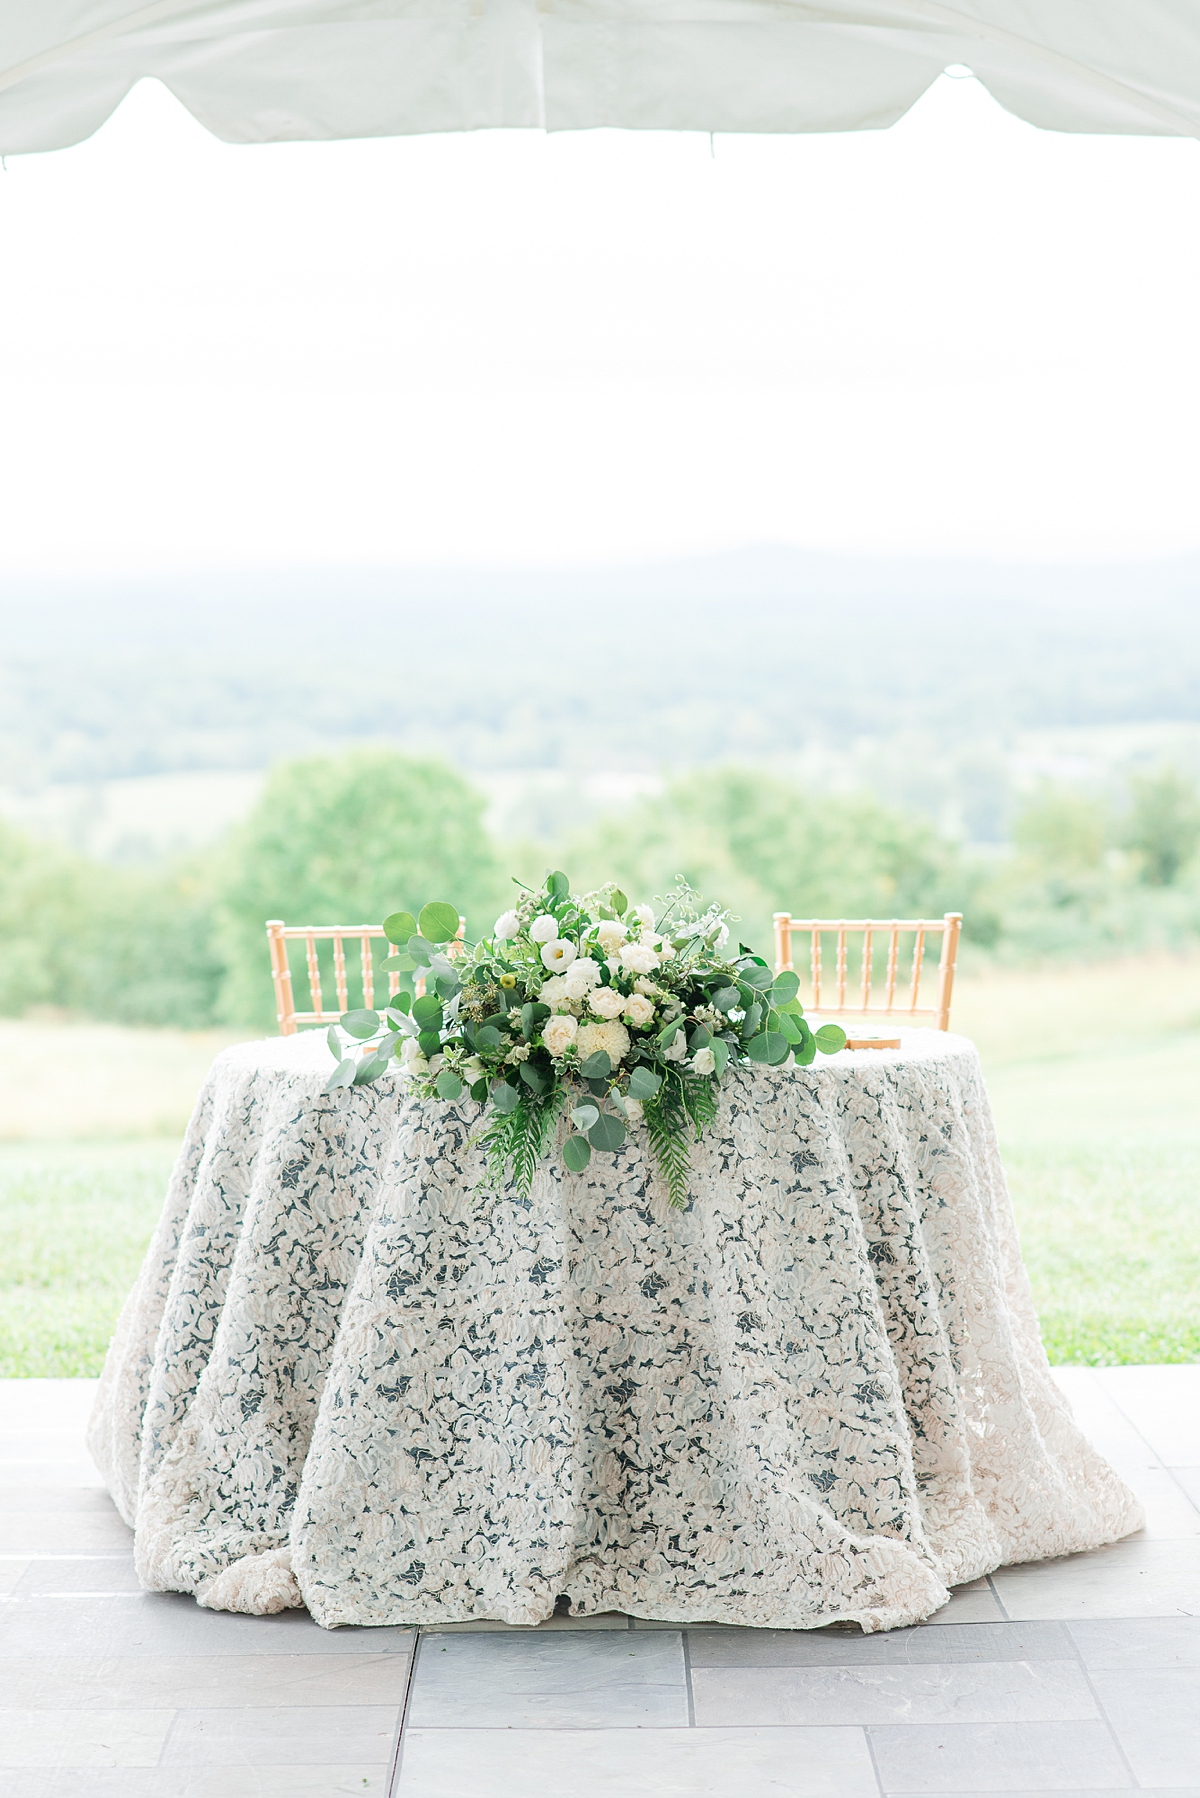 Bride and Groom Table Wedding Reception Decor with Mountain View at a Timeless Grace Estate Winery Wedding. Wedding Photography by Richmond Wedding Photographer Kailey Brianne Photography.